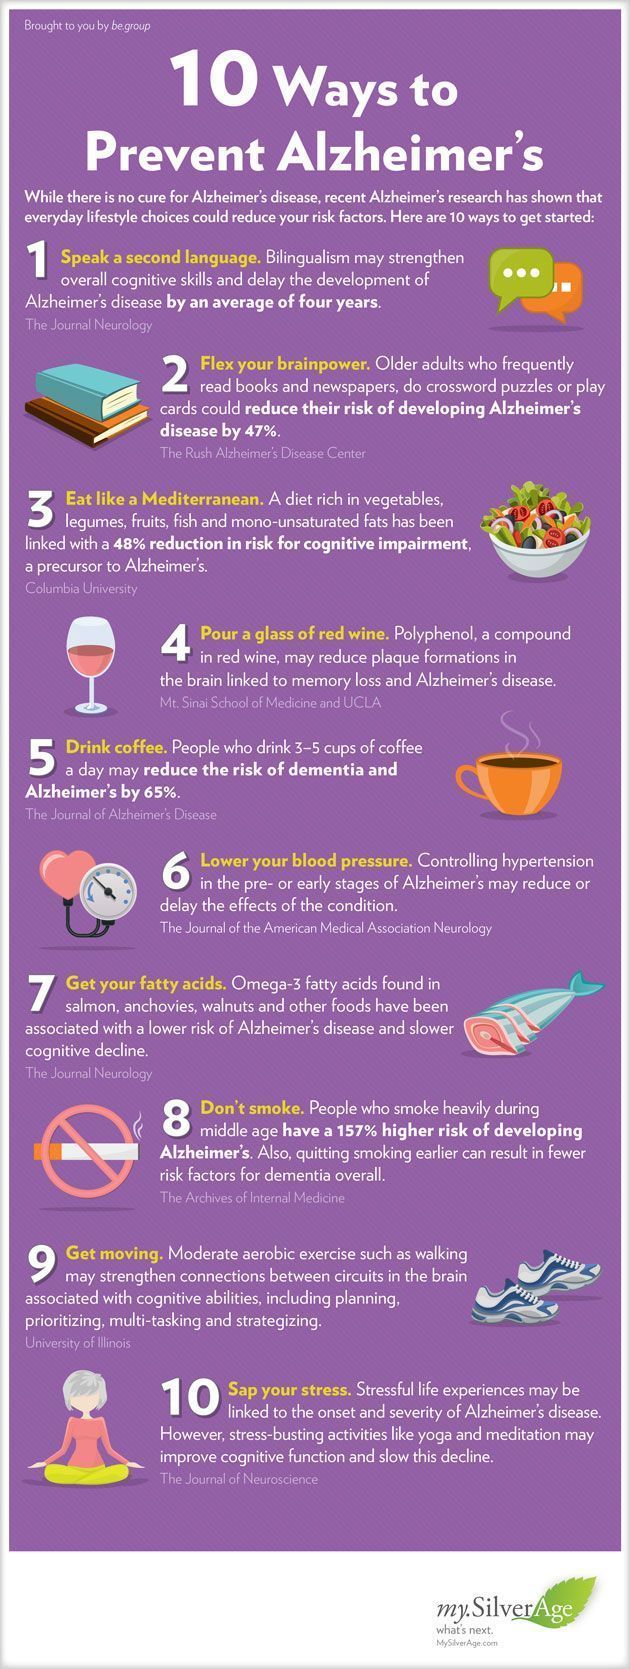 Alzheimer ’s Disease: What You Can Do To Prevent It Infographic